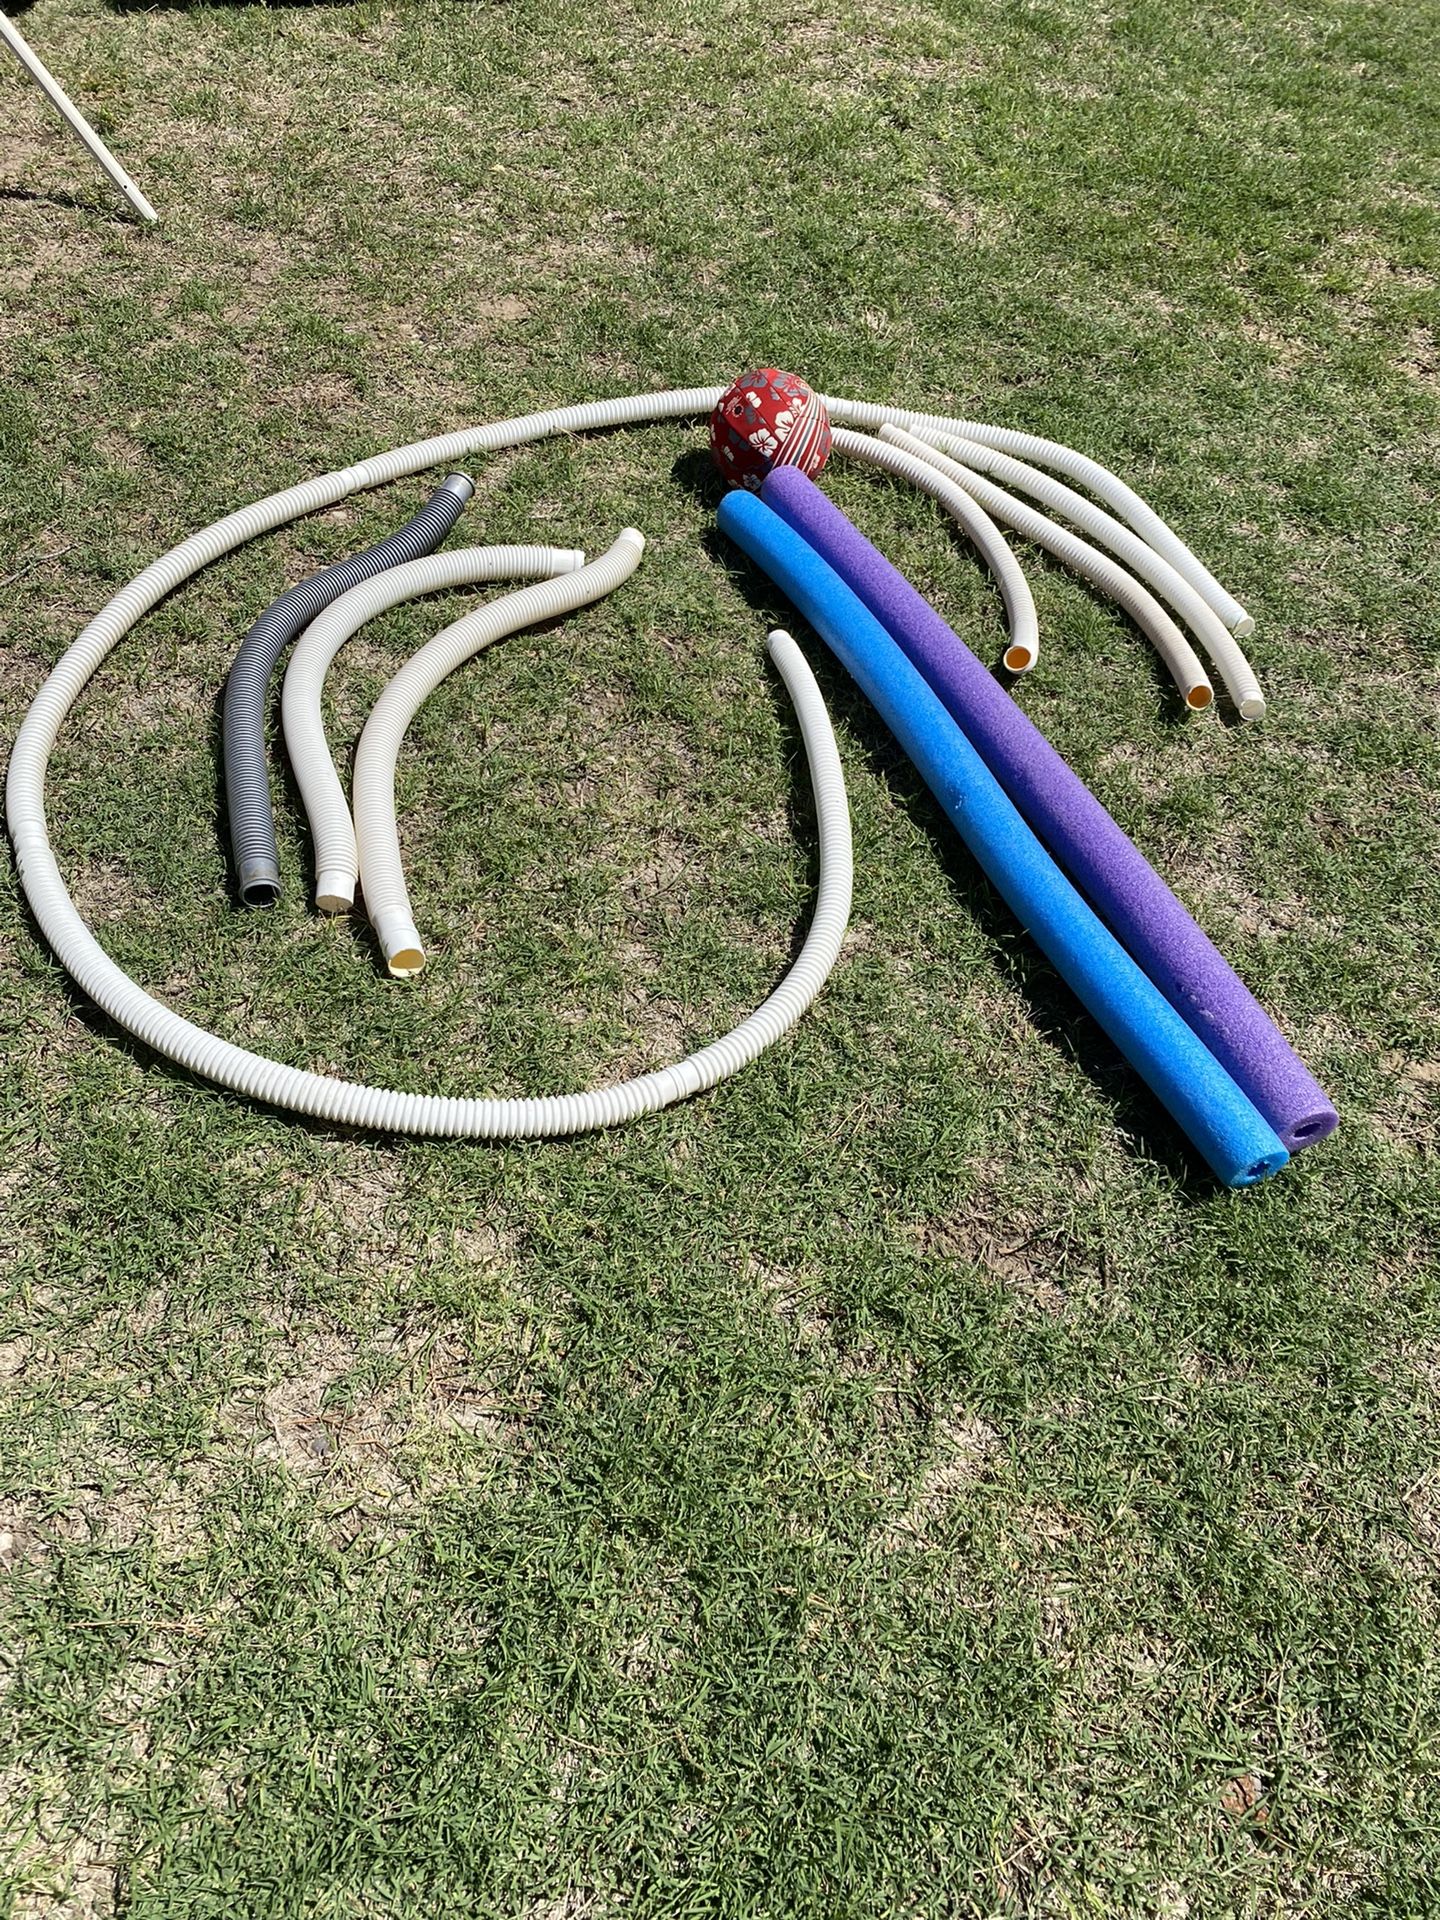 8- Links Of Swimming Pool Hose 2-Pool  Noodles And A Water Volleyball